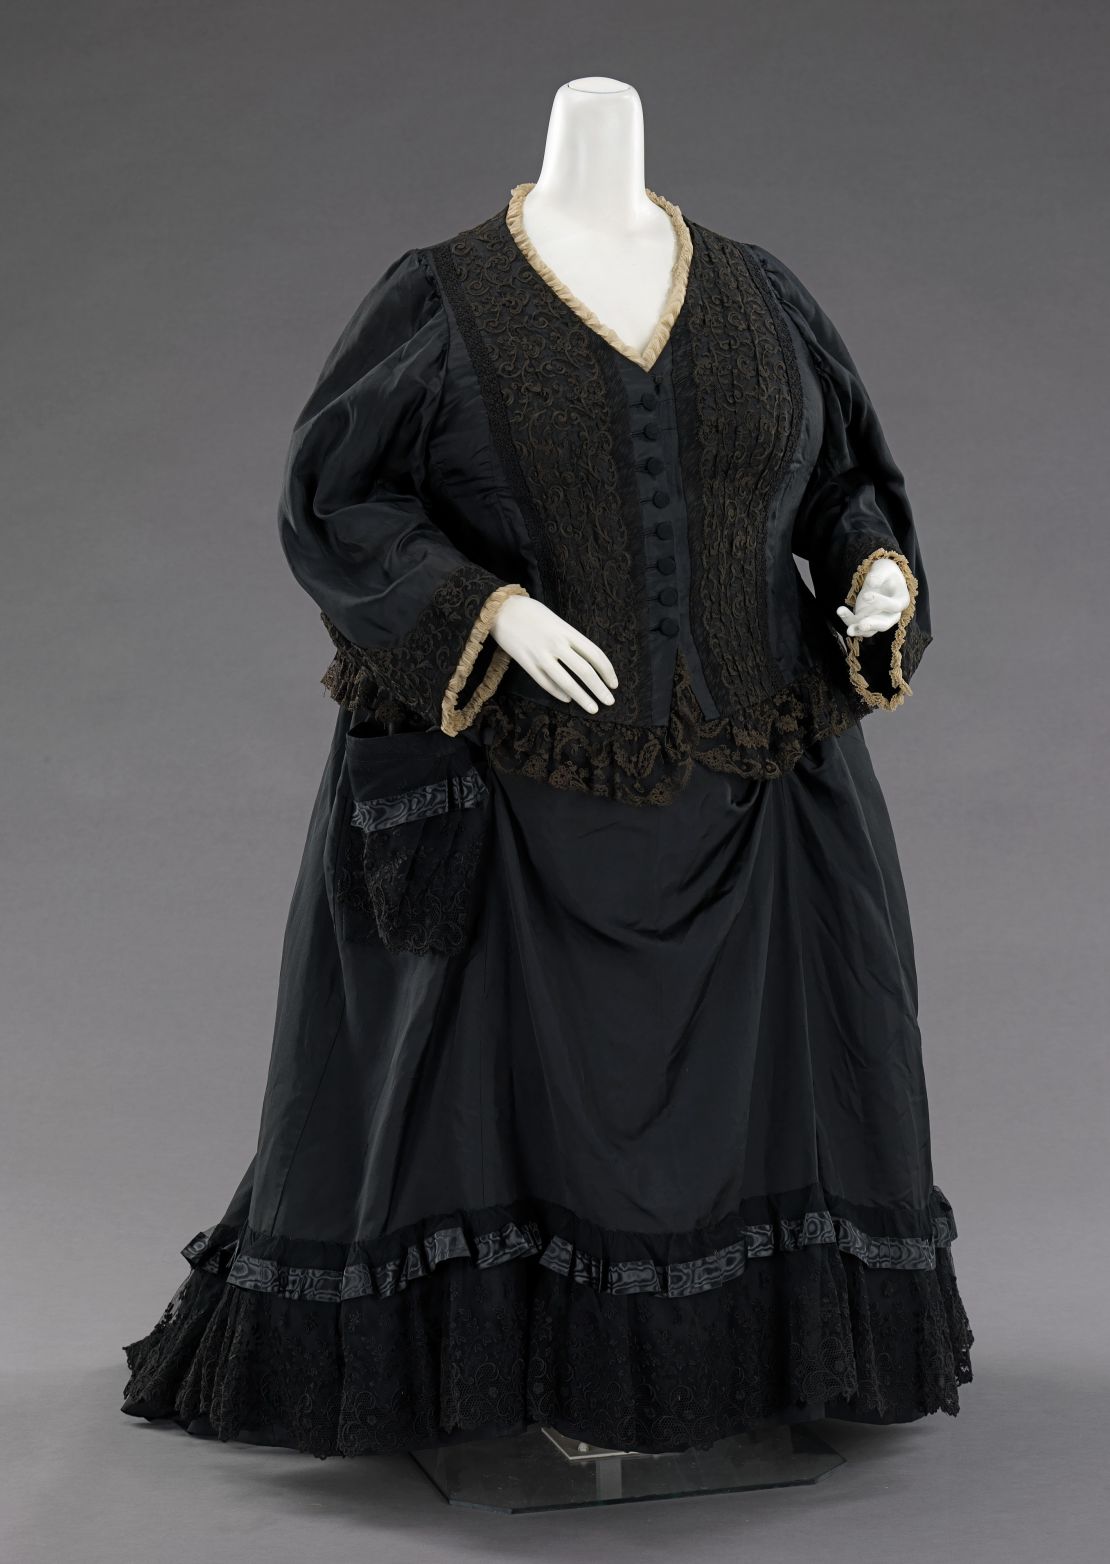 A half-mourning dress worn by Queen Victoria 33 years after Albert's death.